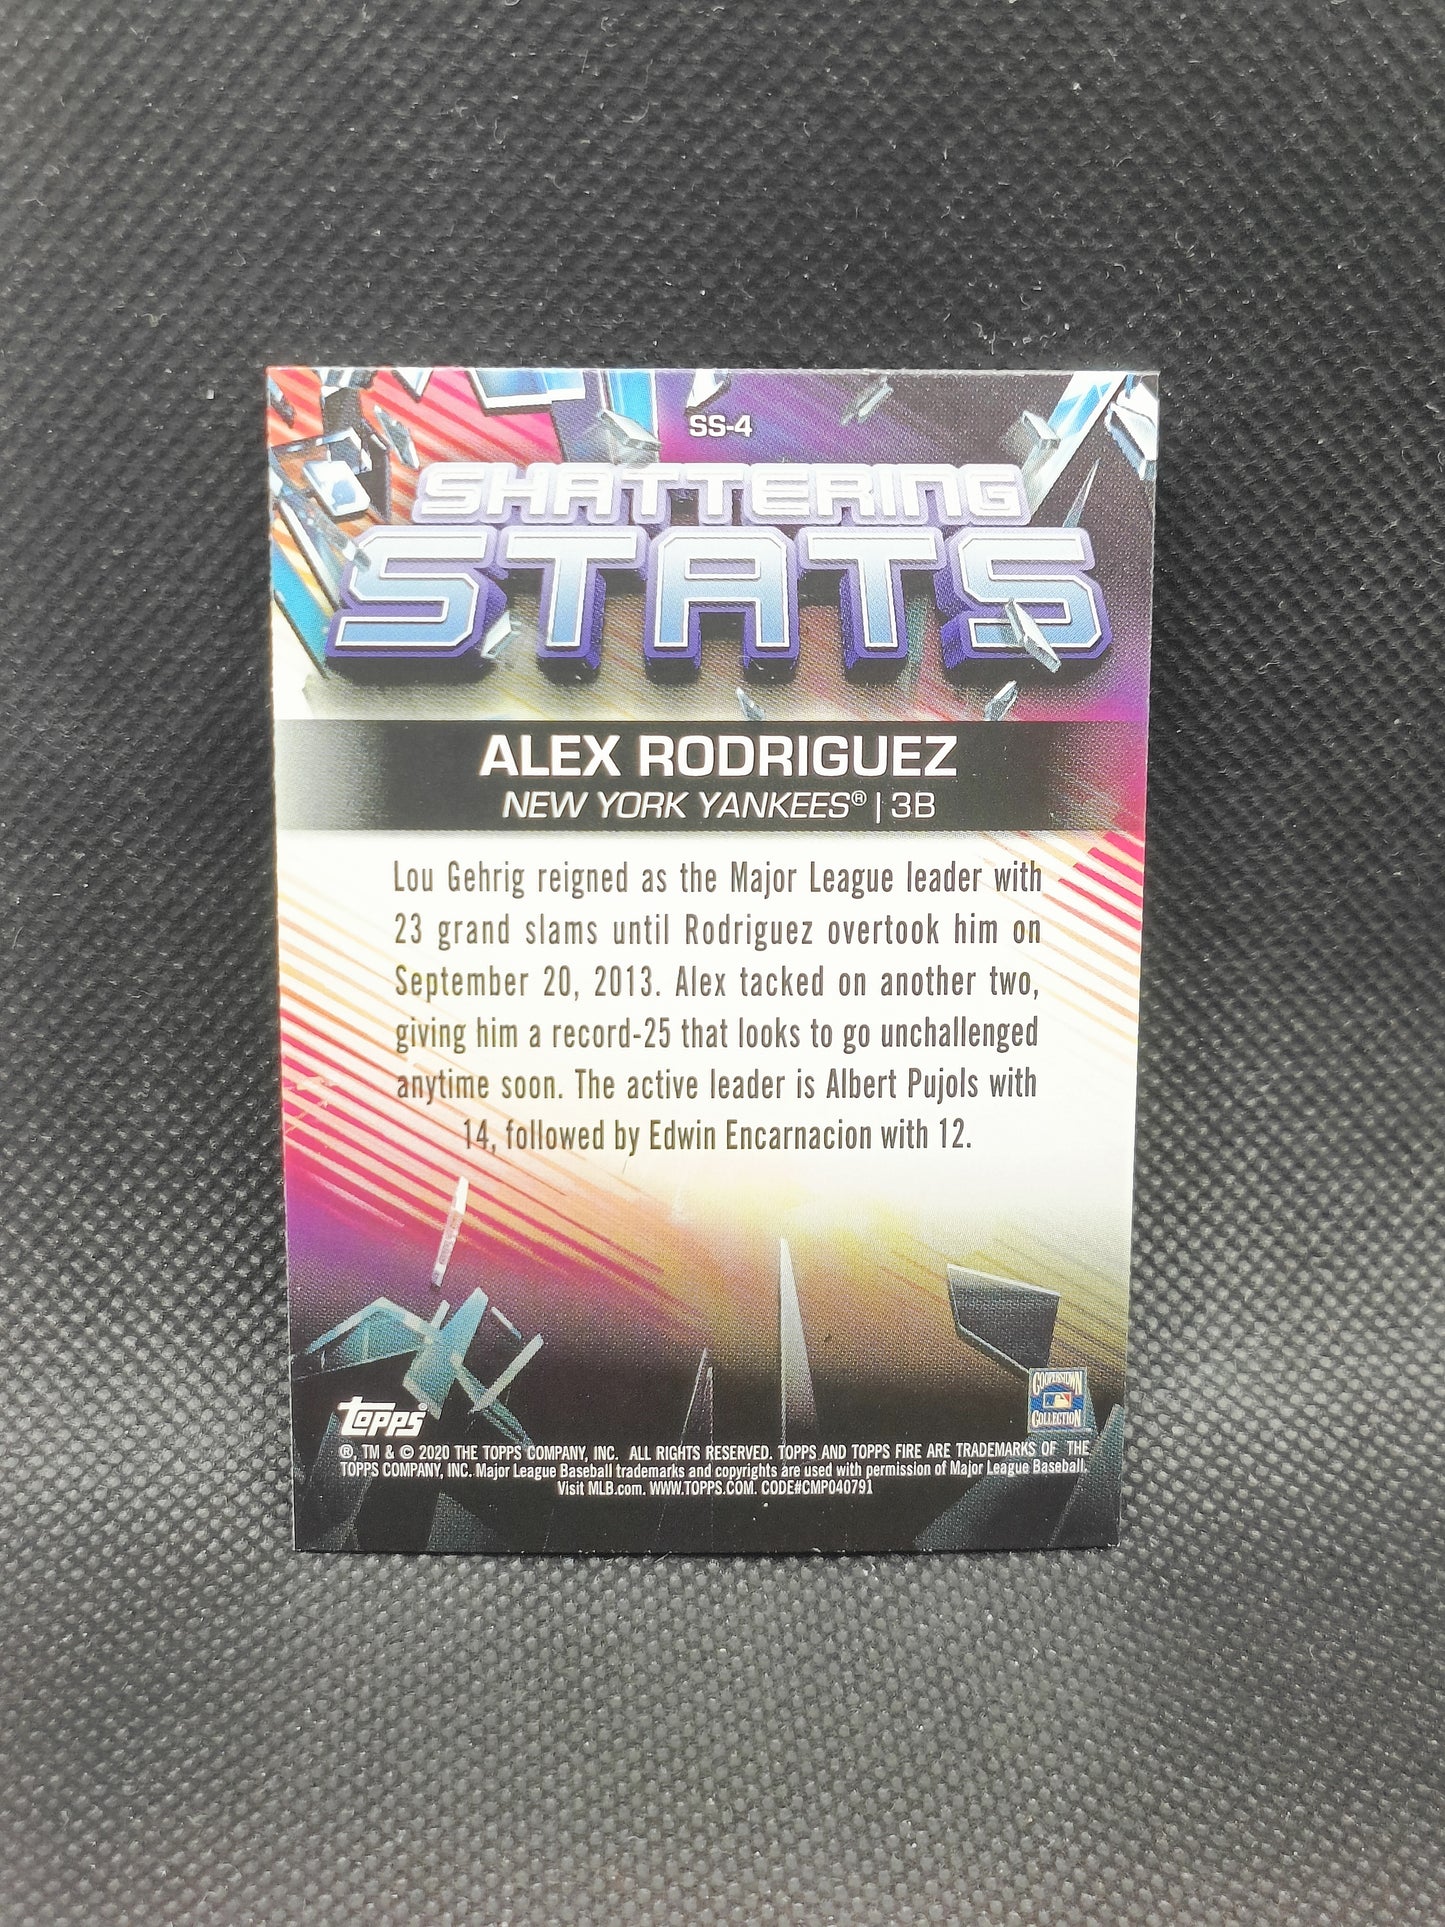 Alex Rodriguez - 2020 Topps Fire Shattering Stats Insert Gold Minted Foil - New York Yankees